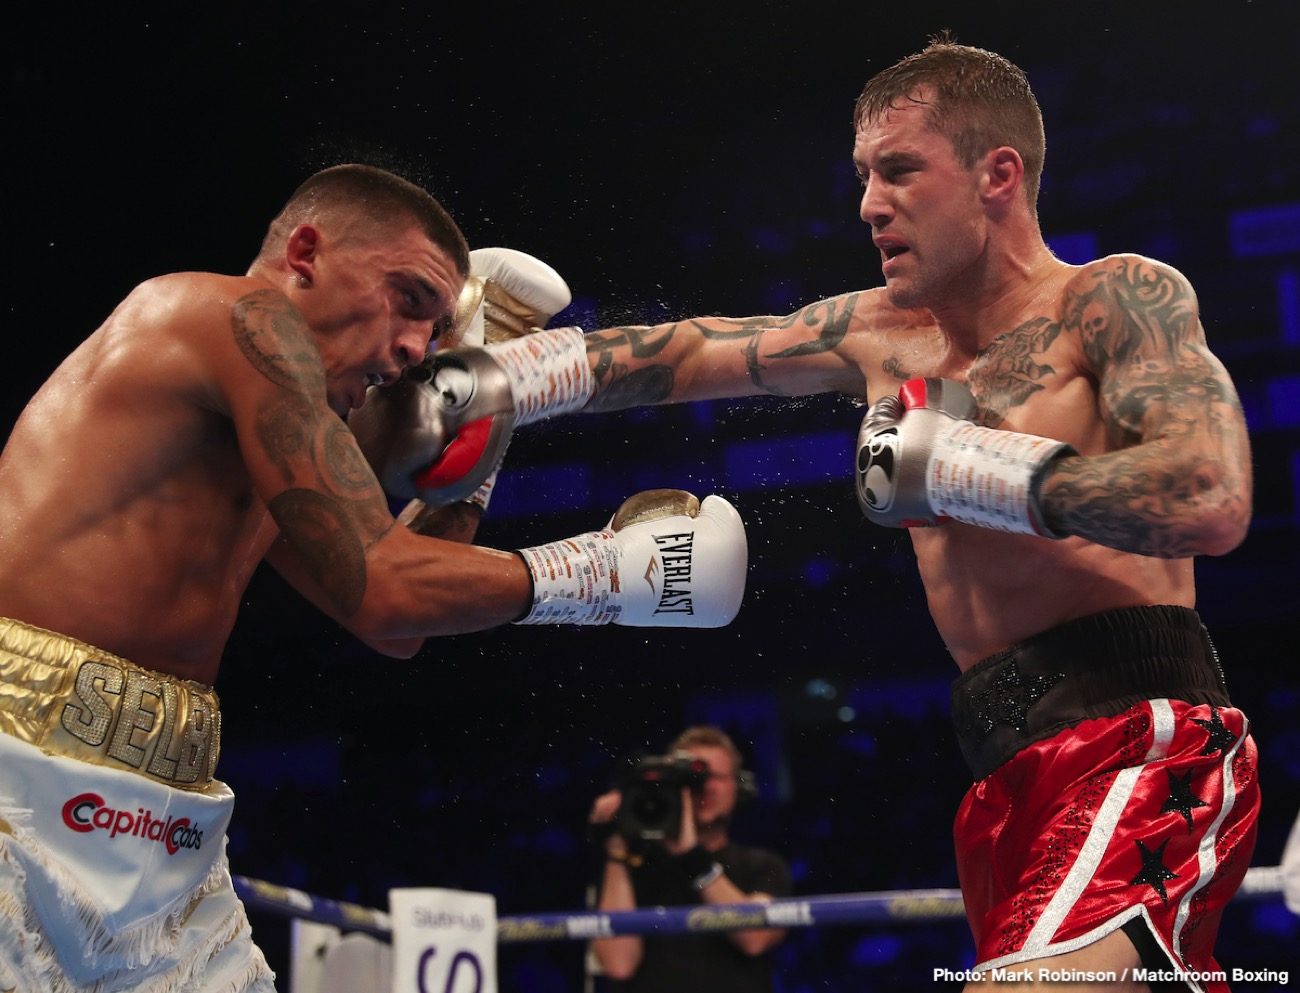 RESULTS: Lee Selby Wins 12-Round Decision Over Ricky Burns In Tough But Messy Battle